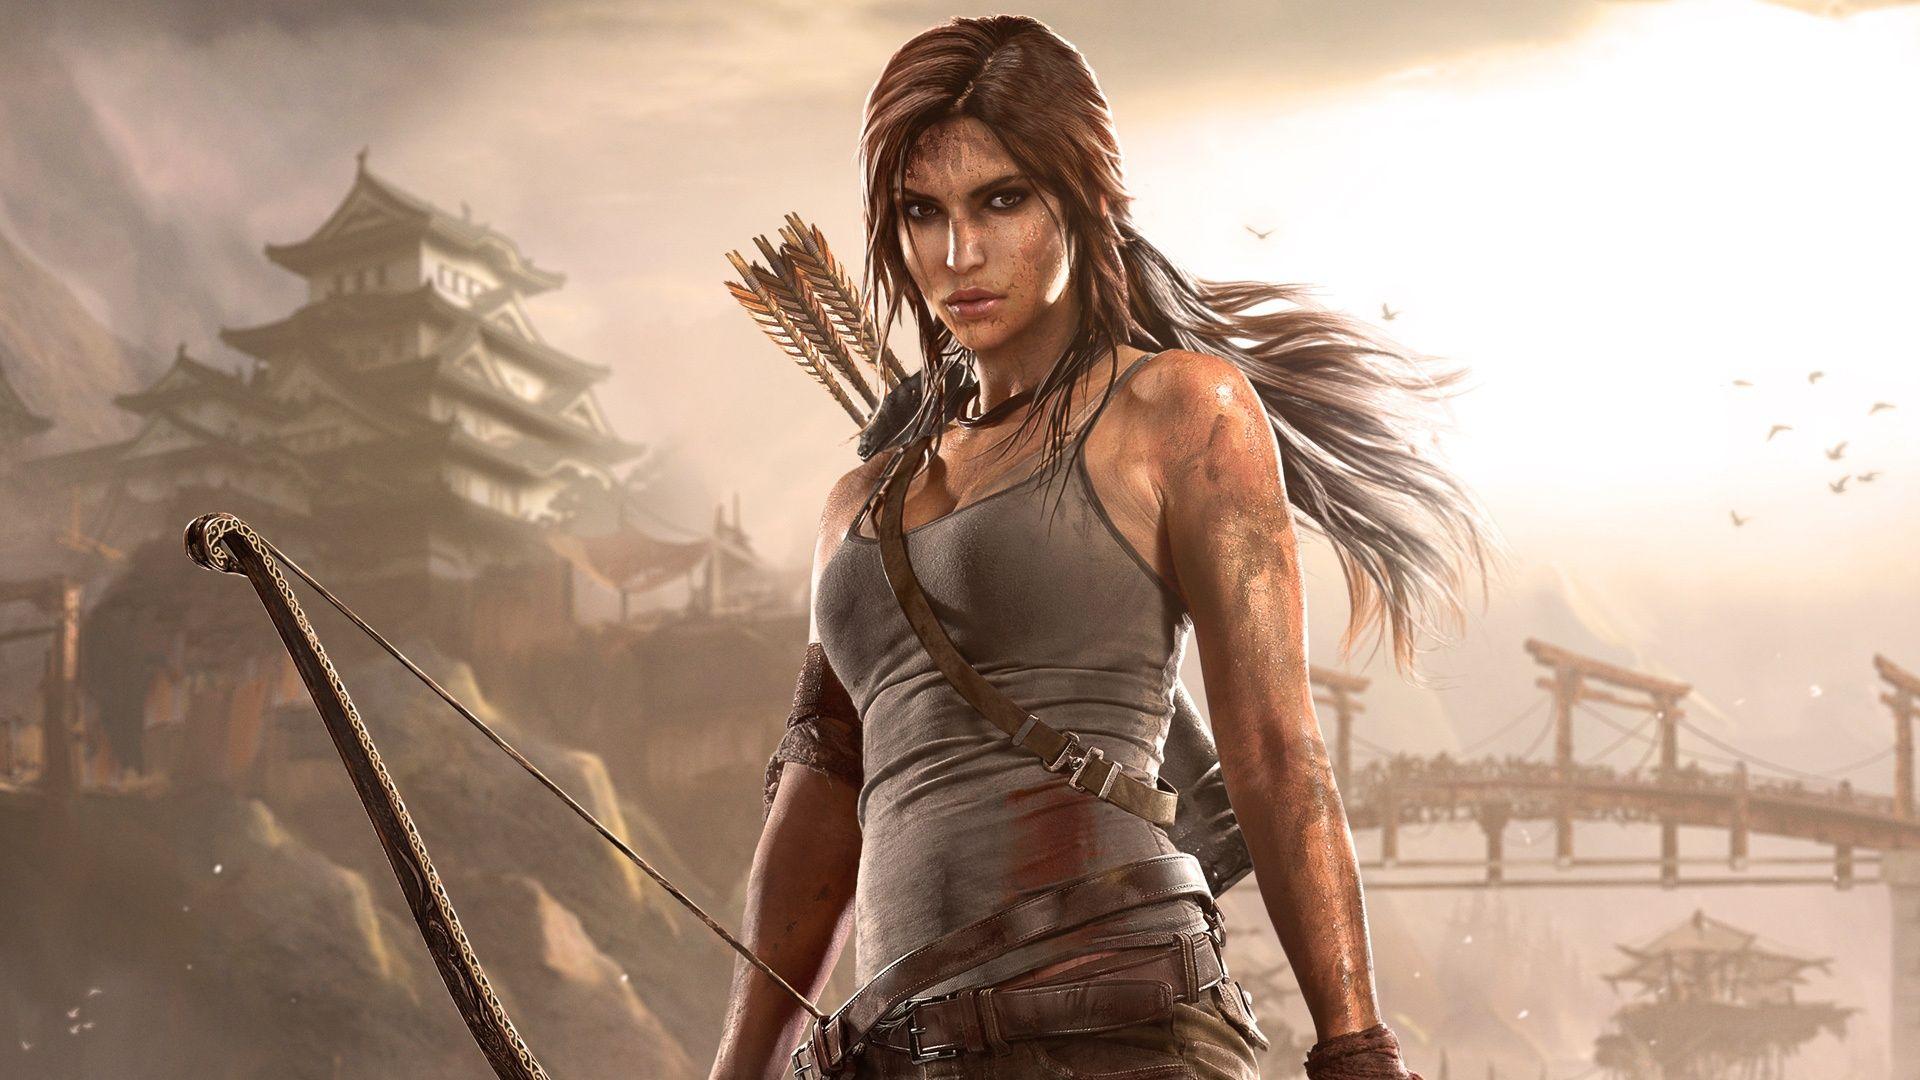 Tomb Raider 2013 Wallpaper in jpg format for free download